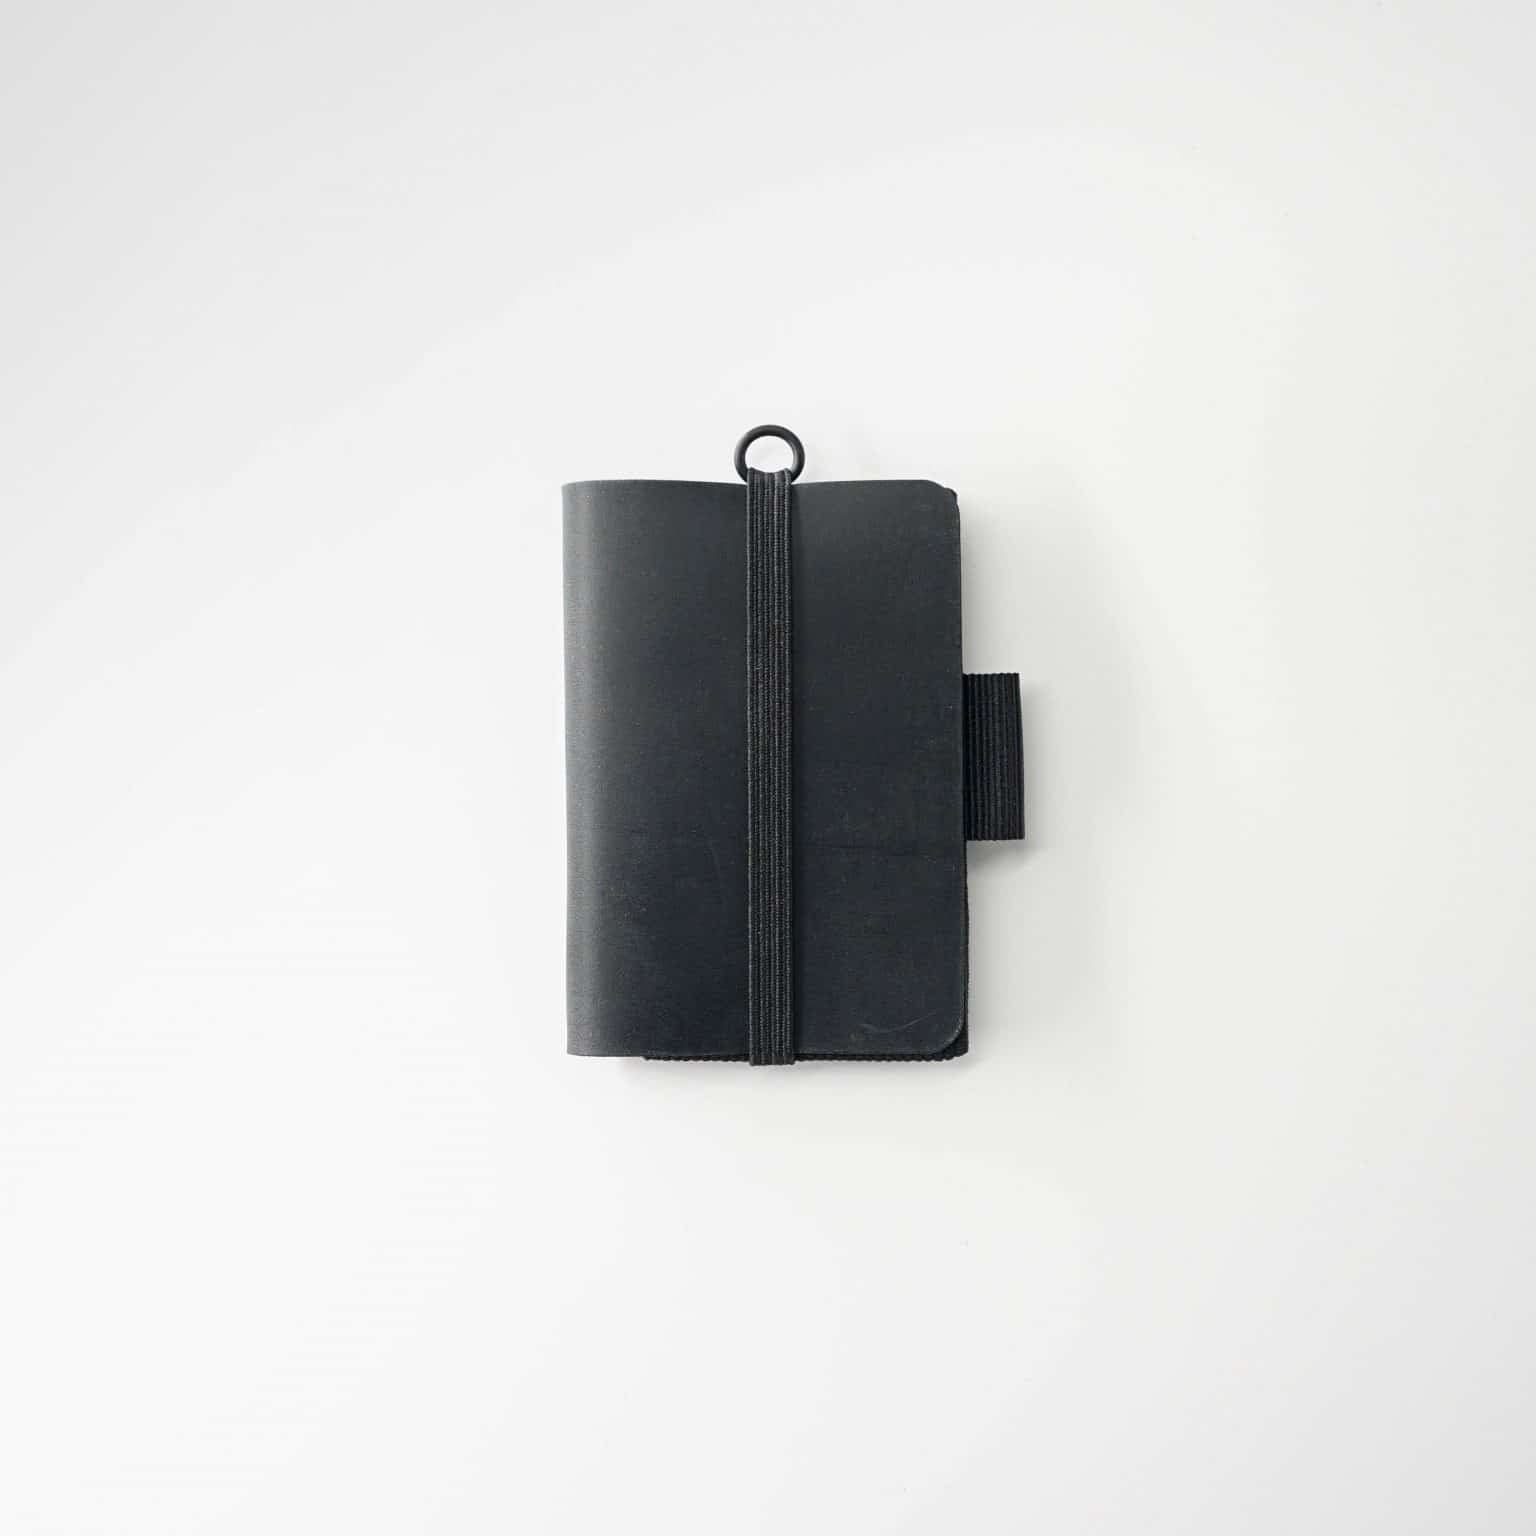 Customizable slim wallet tailored for personal style.